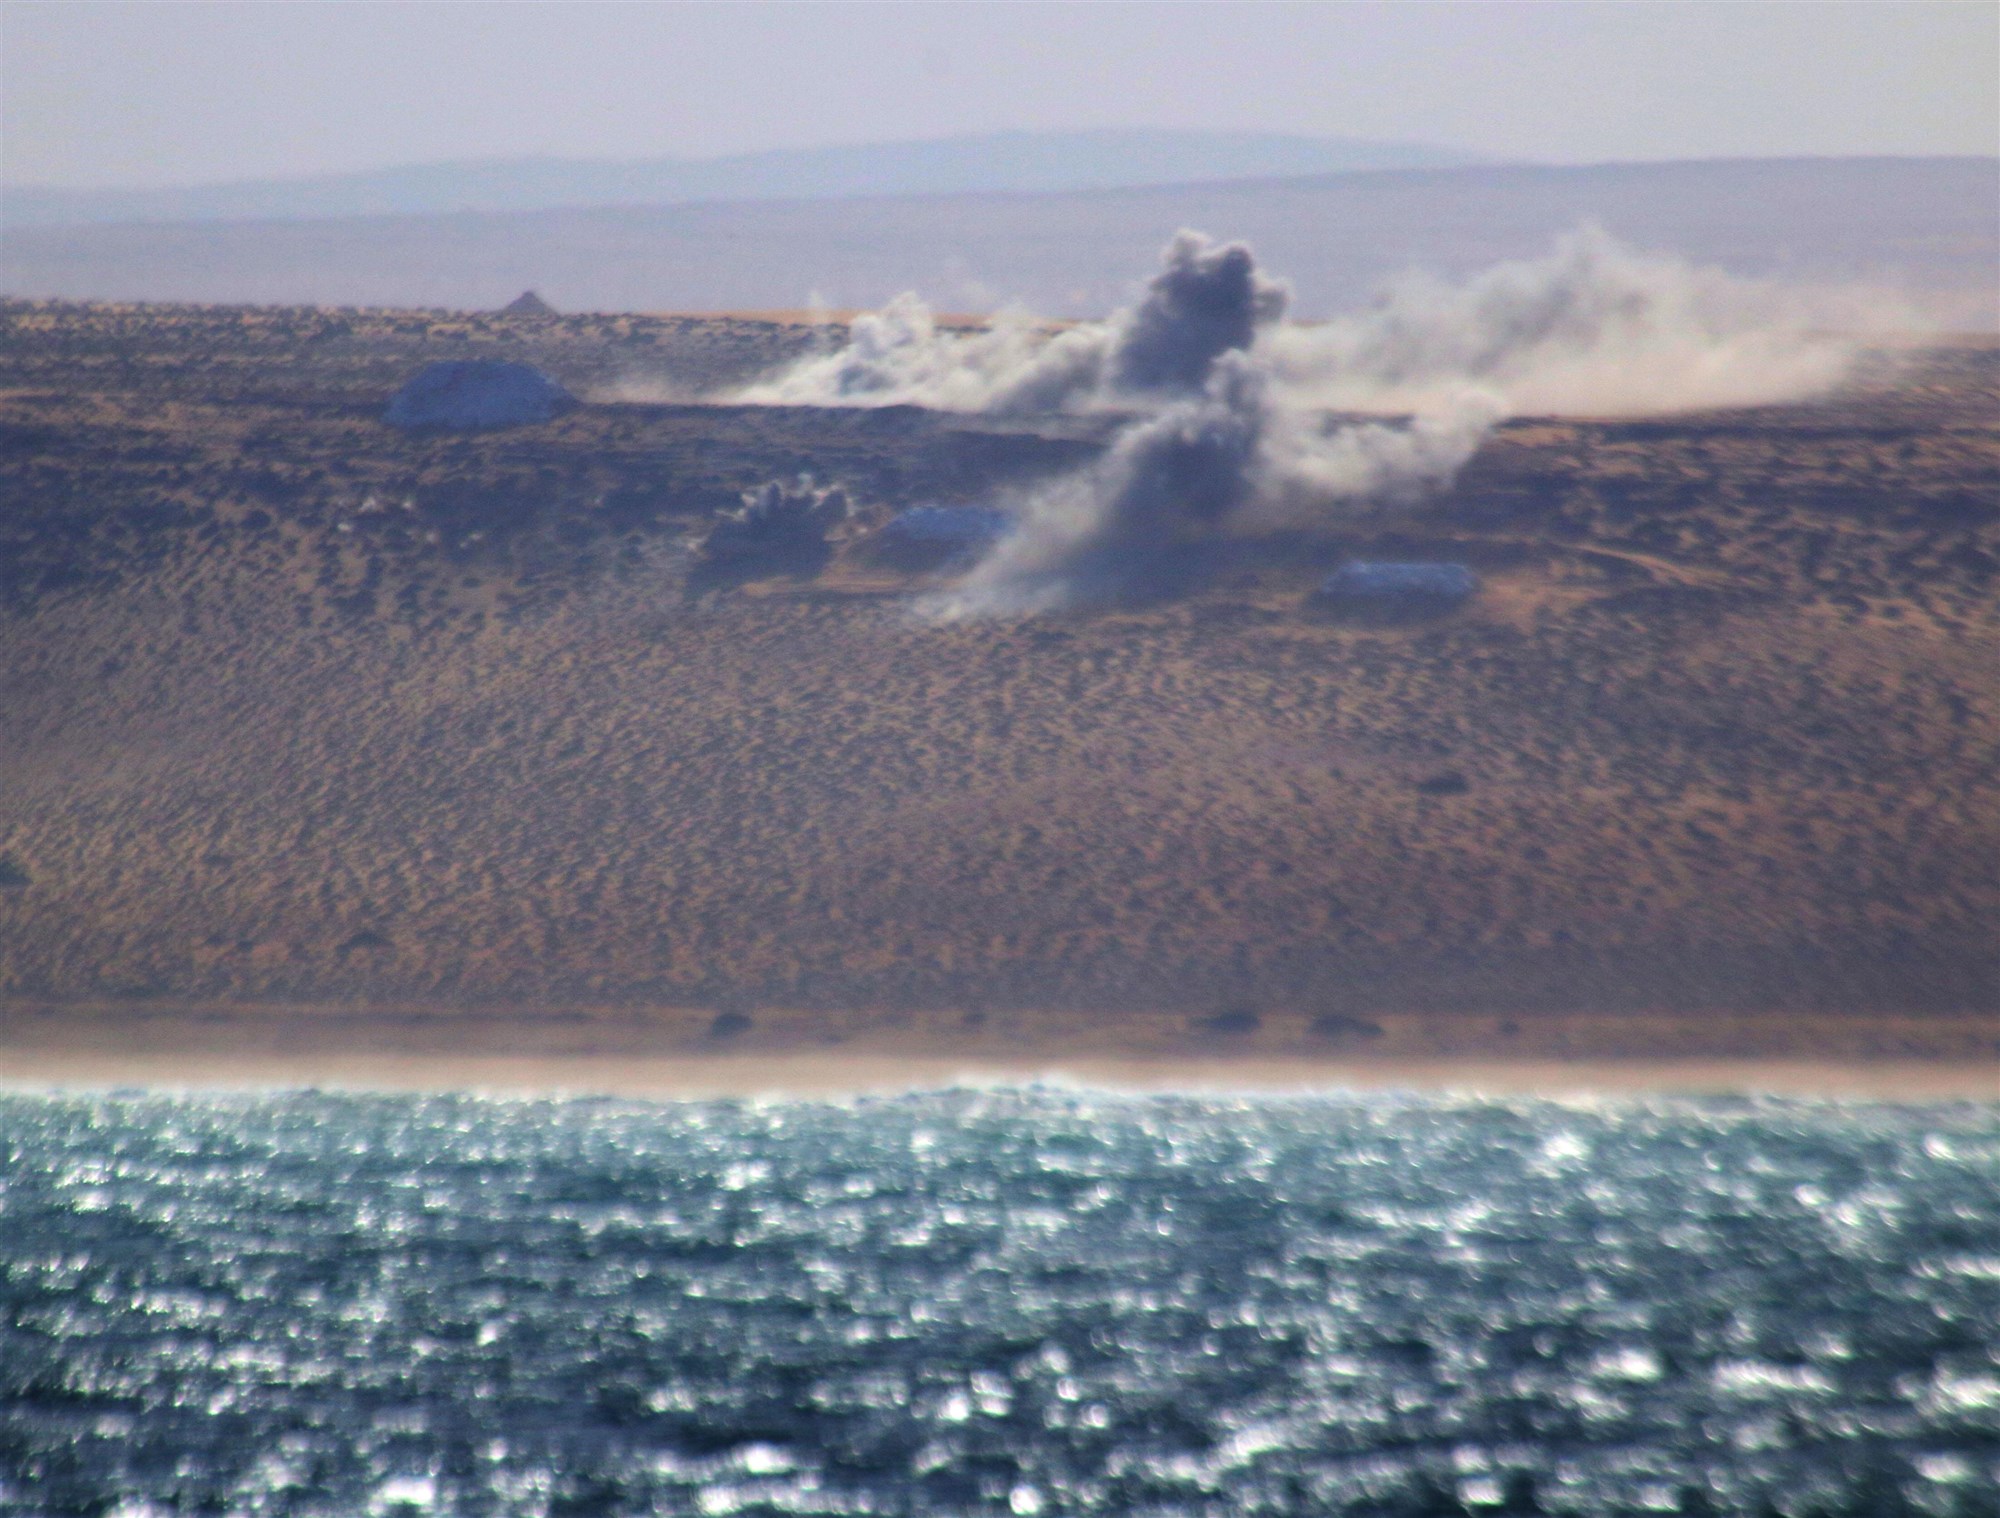 uss-ross-conducts-live-fire-exercises-with-the-royal-moroccan-navy